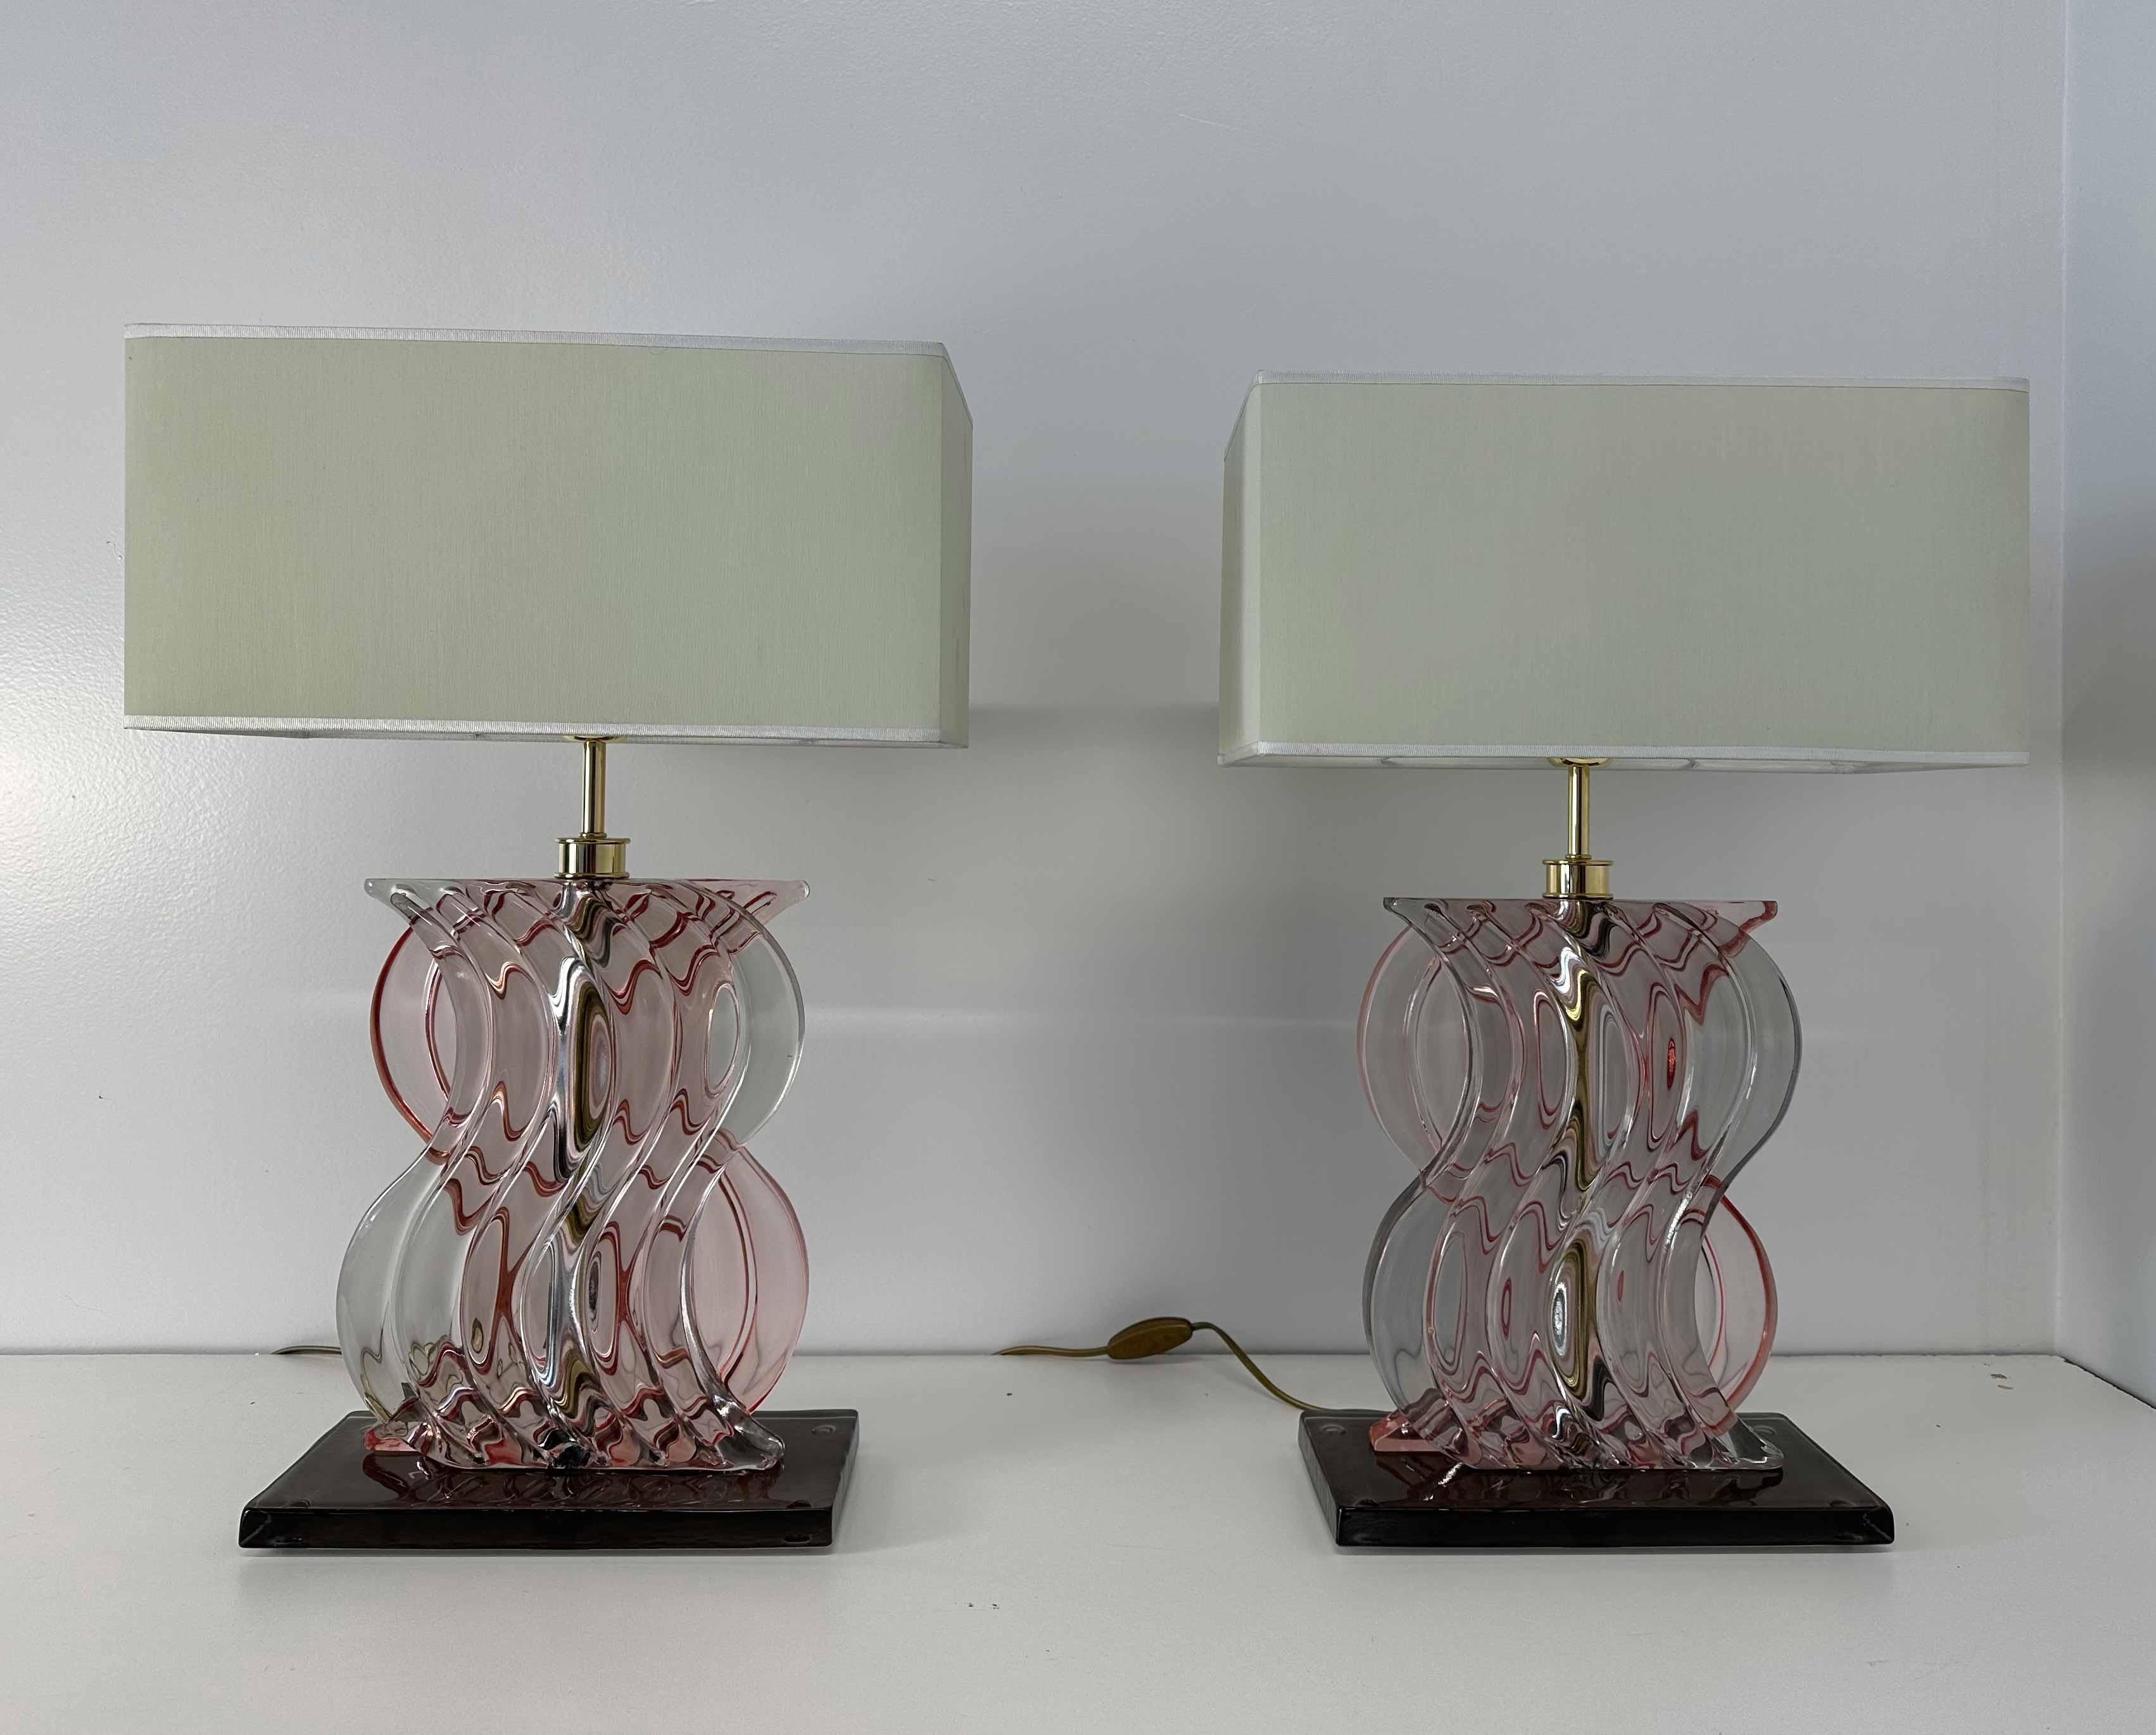 This pair of Art Deco Style lamps was produced in Italy in the 2000s. 
The central part of the structure is in gold galvanized brass, covered with a pastel pink sinuous Murano glass. The base is a brown piece of Murano glass. 
The lampshade is